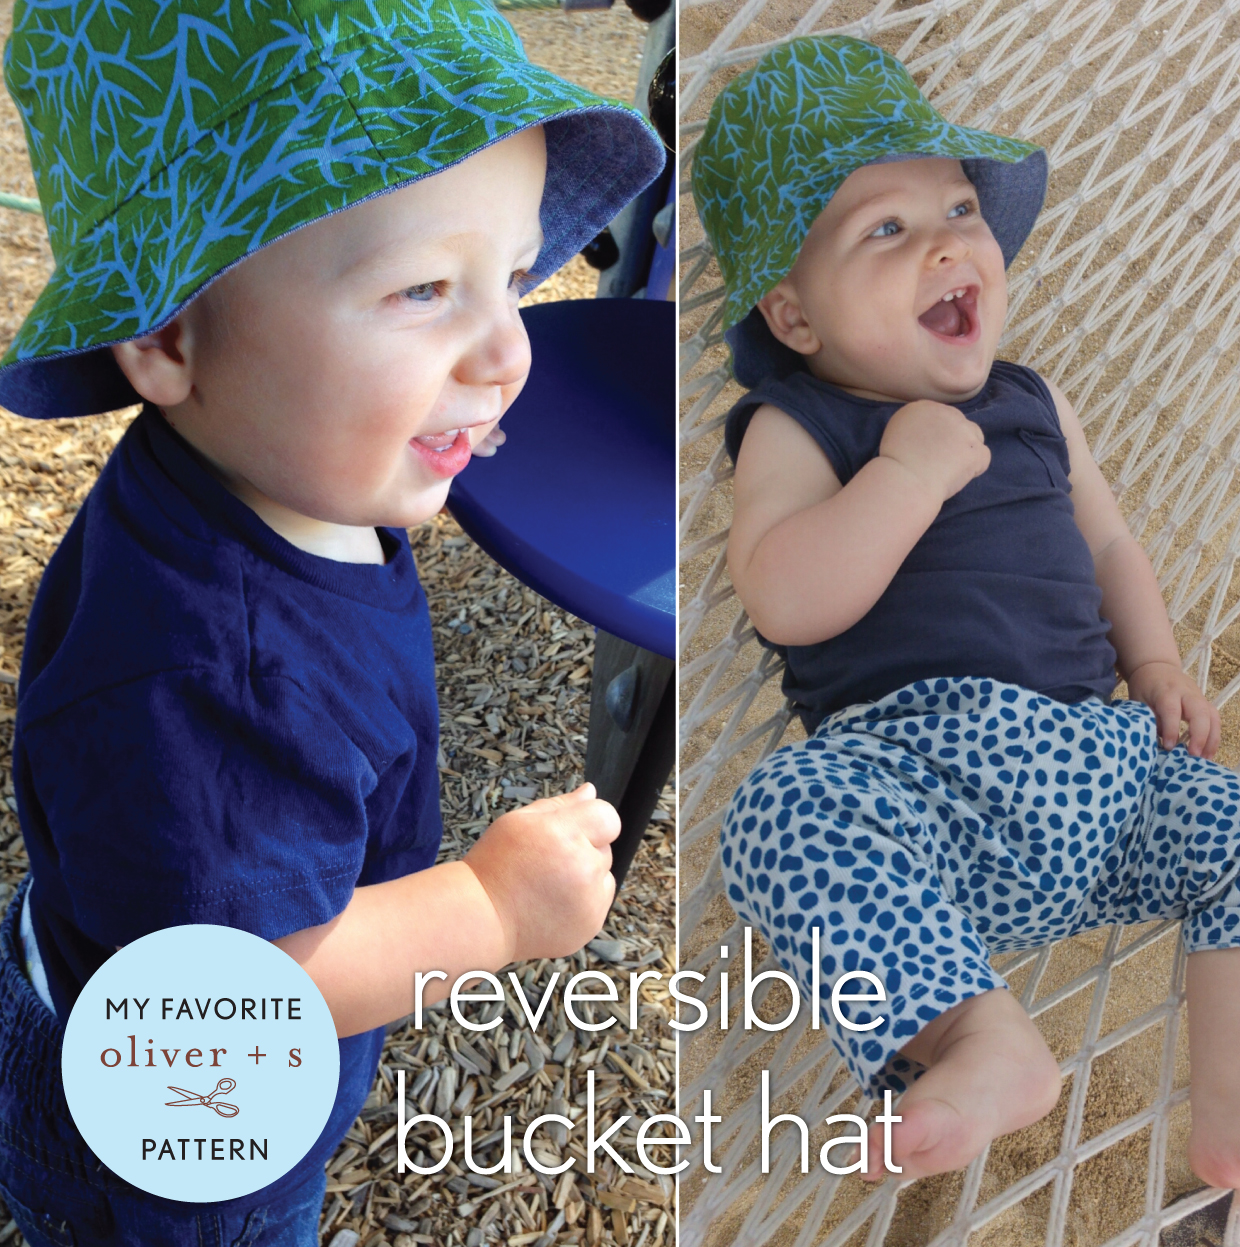 Reversible Wide Brim Sun Hat, sewing pattern and instructions, digital  format